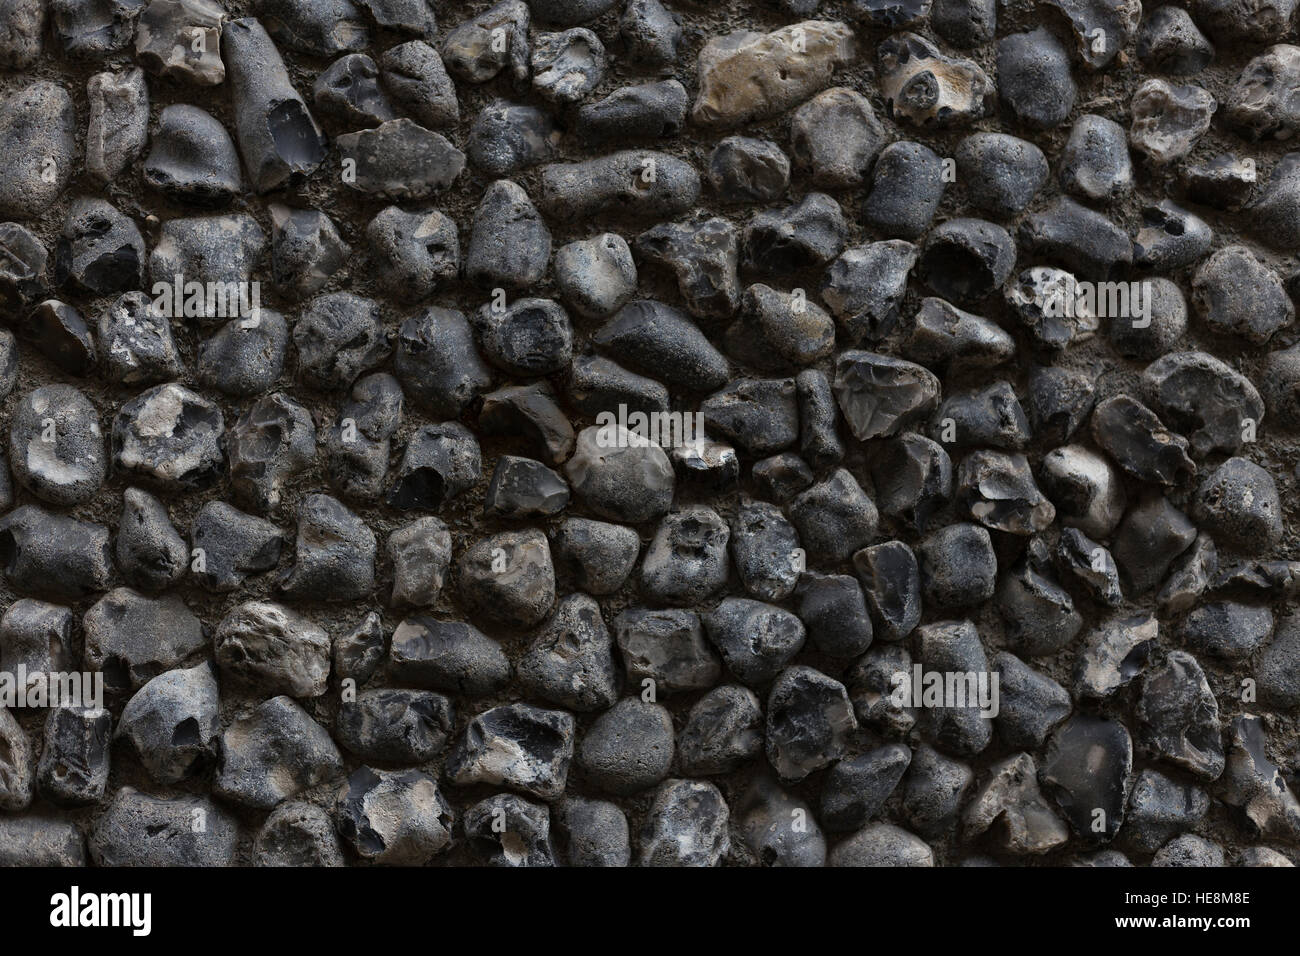 Close-up of building with textured, coarse grey, black and white pebbledash exterior wall treatment Stock Photo